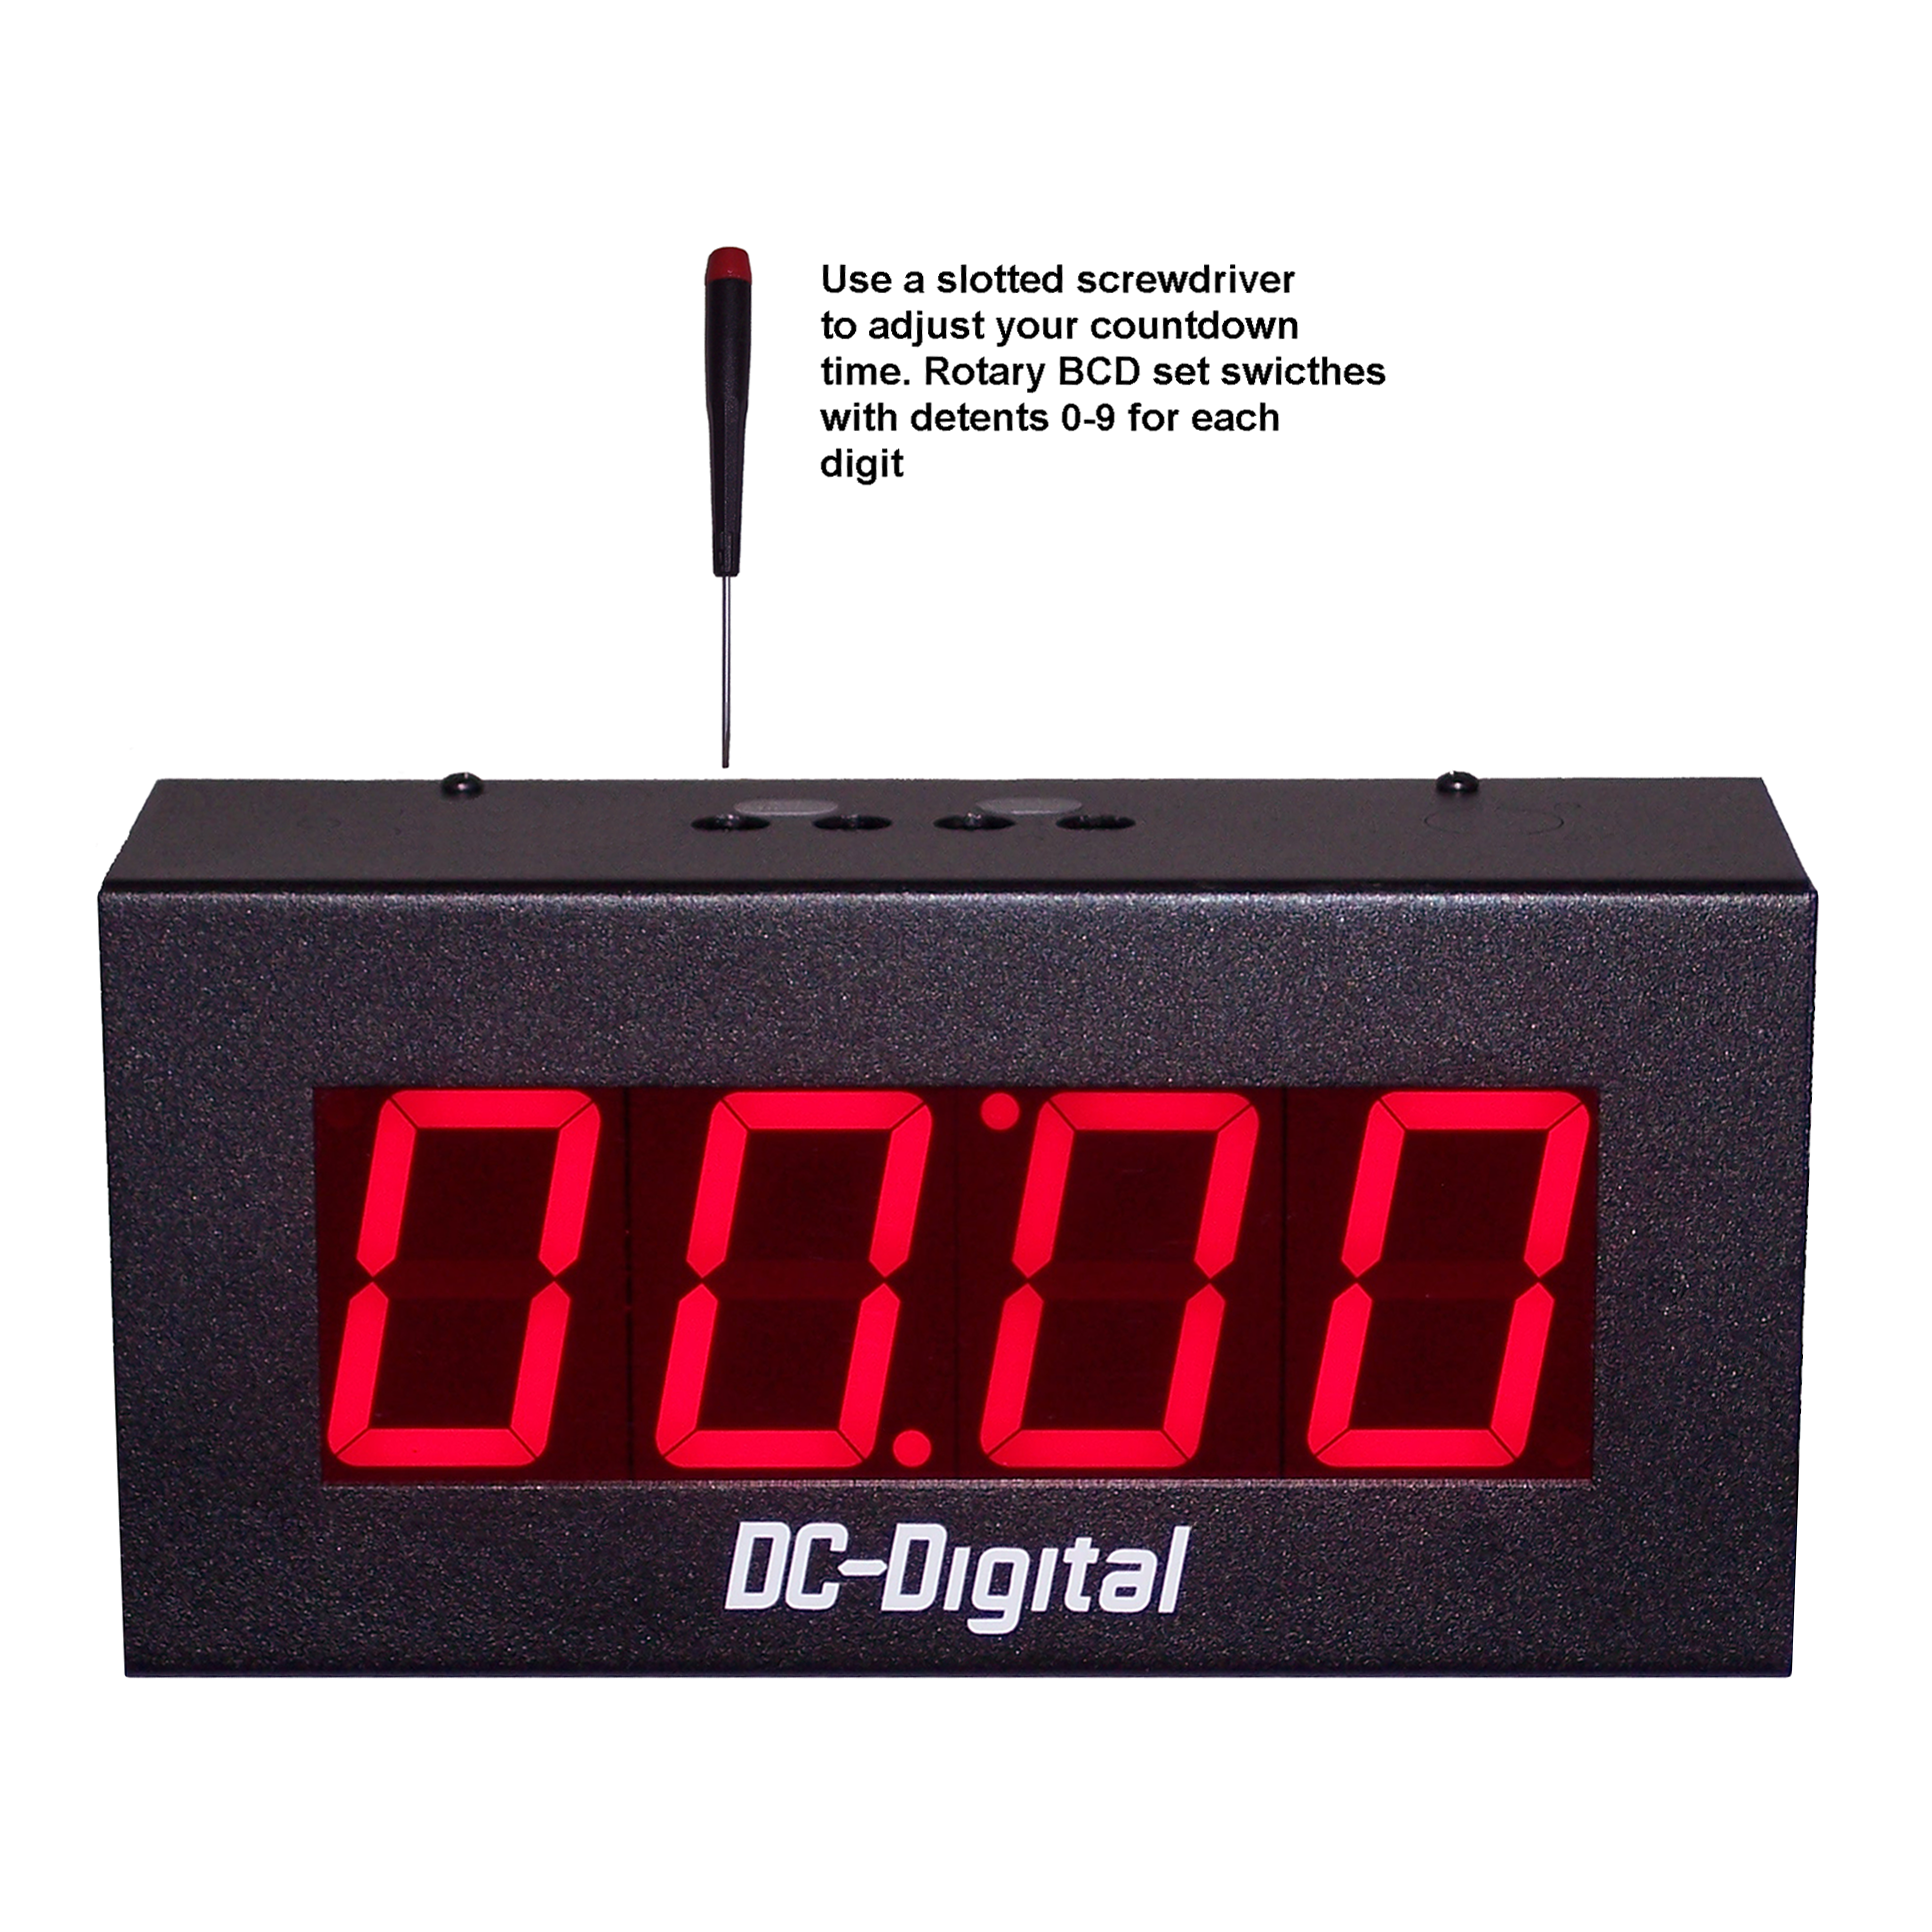 (DC-25T-DN-BCD-WELLNESS) Wellness Check, Suicide Watch, Jail, Prison, Ward Digital Countdown Reminder Timer, 2.3 Inch LED Digital, Simple BCD Rotary Set Switches, Looping Feature, End of Period Buzzer